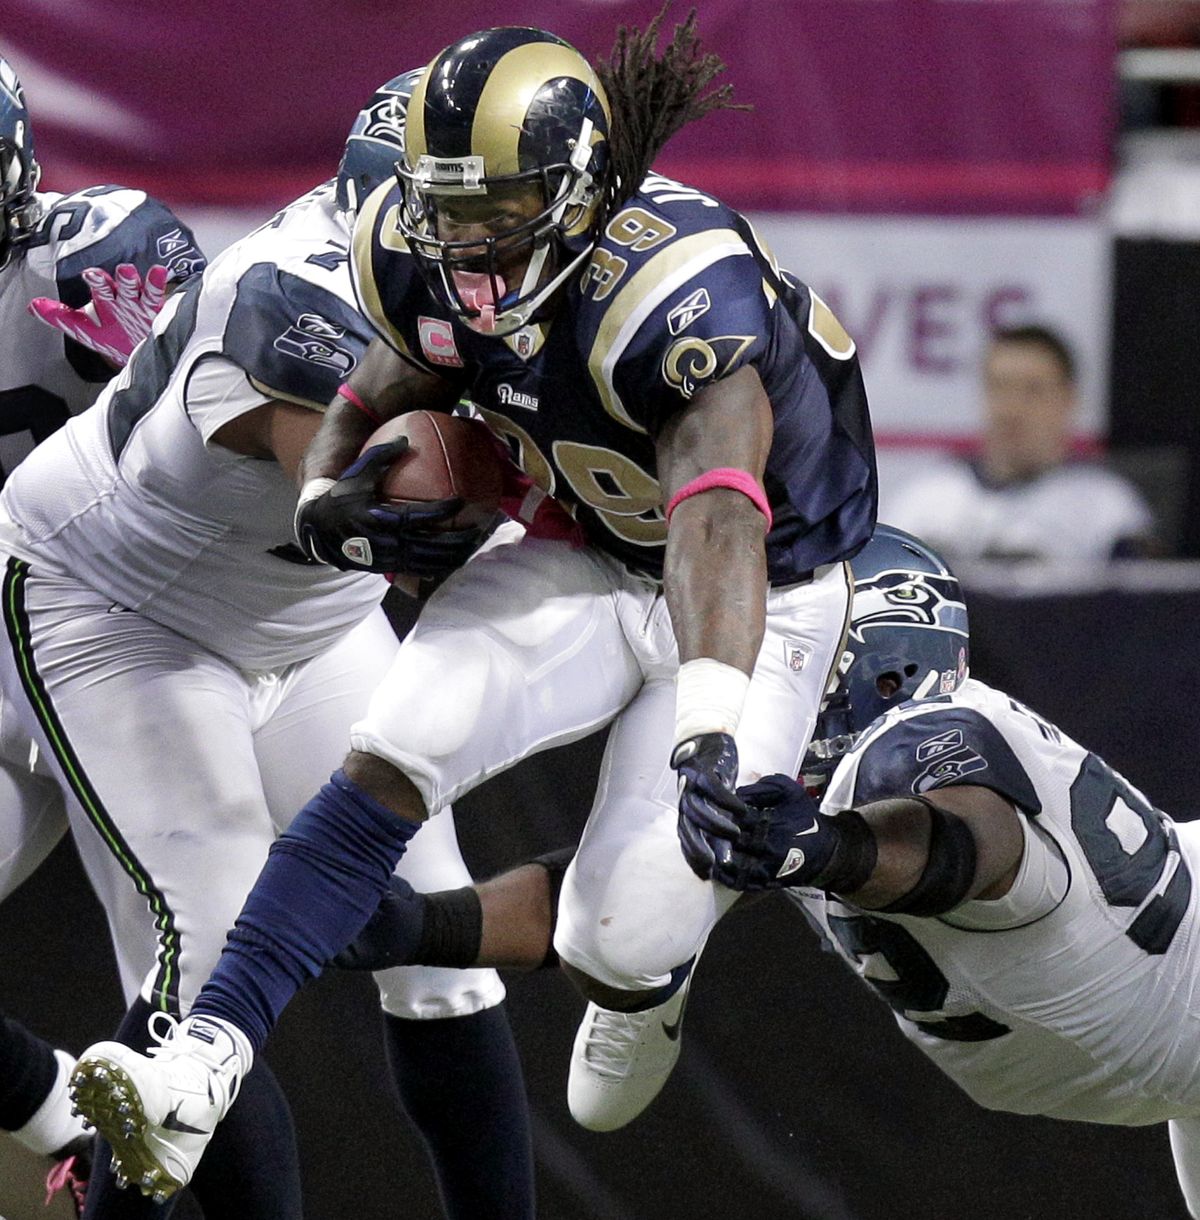 Rams running back Steven Jackson runs through Seattle defenders for a 15-yard gain in the fourth quarter. (Associated Press)